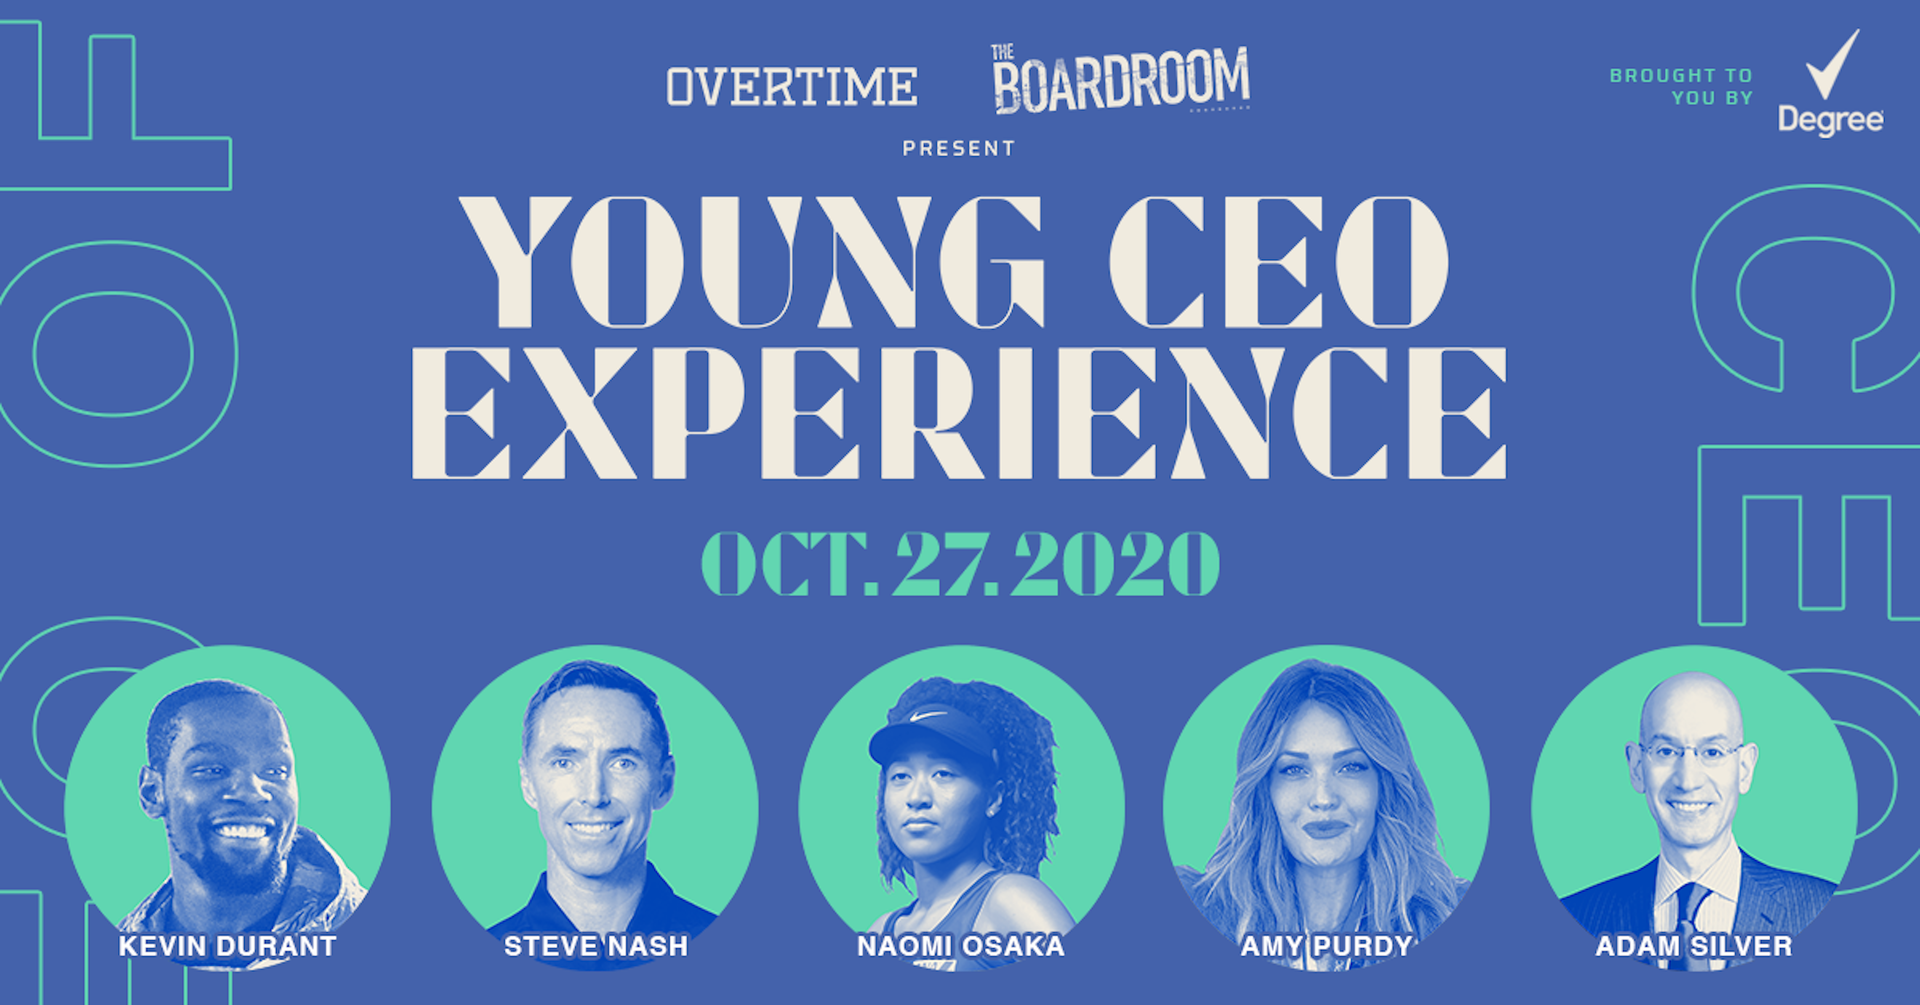 Young CEO. It’s not a conference, it’s an experience